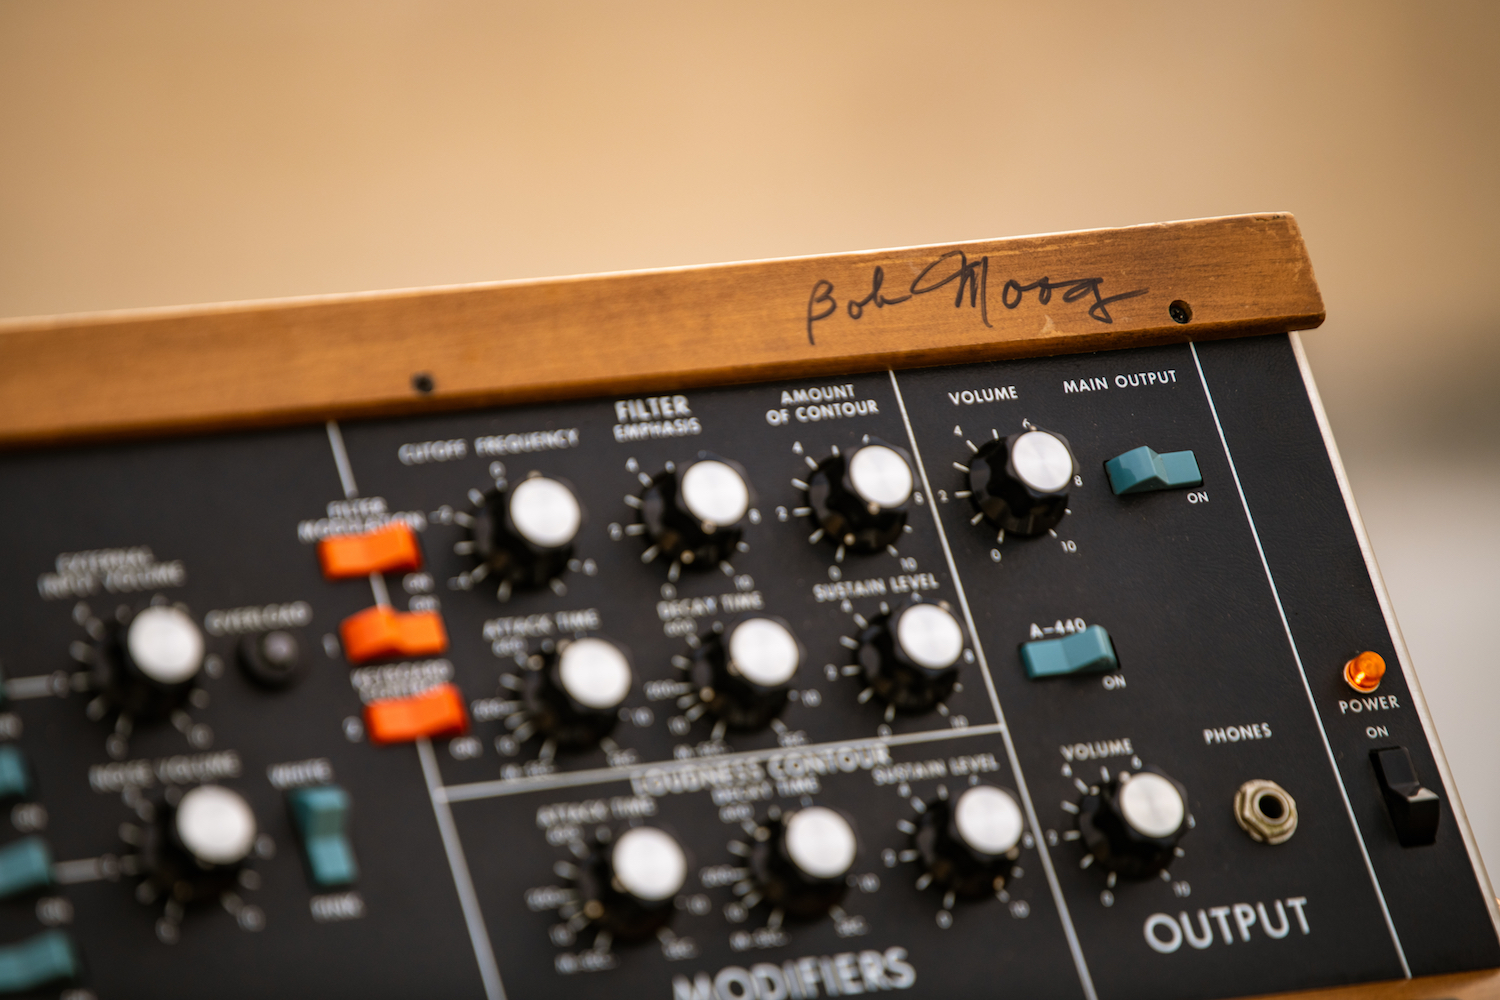 Minimoog Model D synthesizer, serial number 6572, signed by Bob Moog